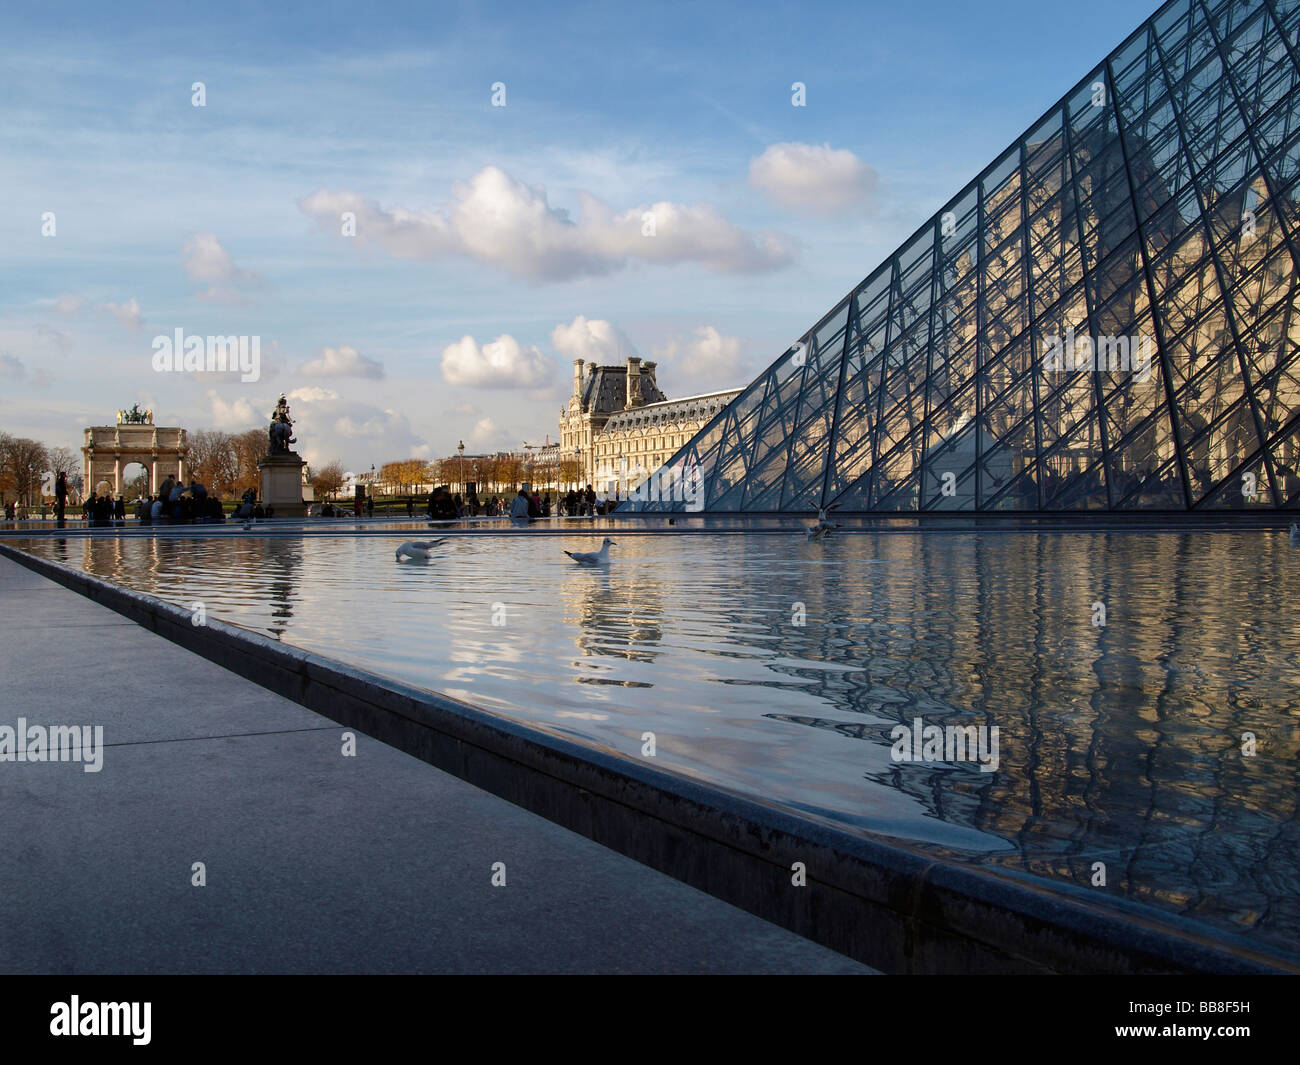 Louvre, pyramid and small triumphal arch, Paris, France, Europe Stock Photo